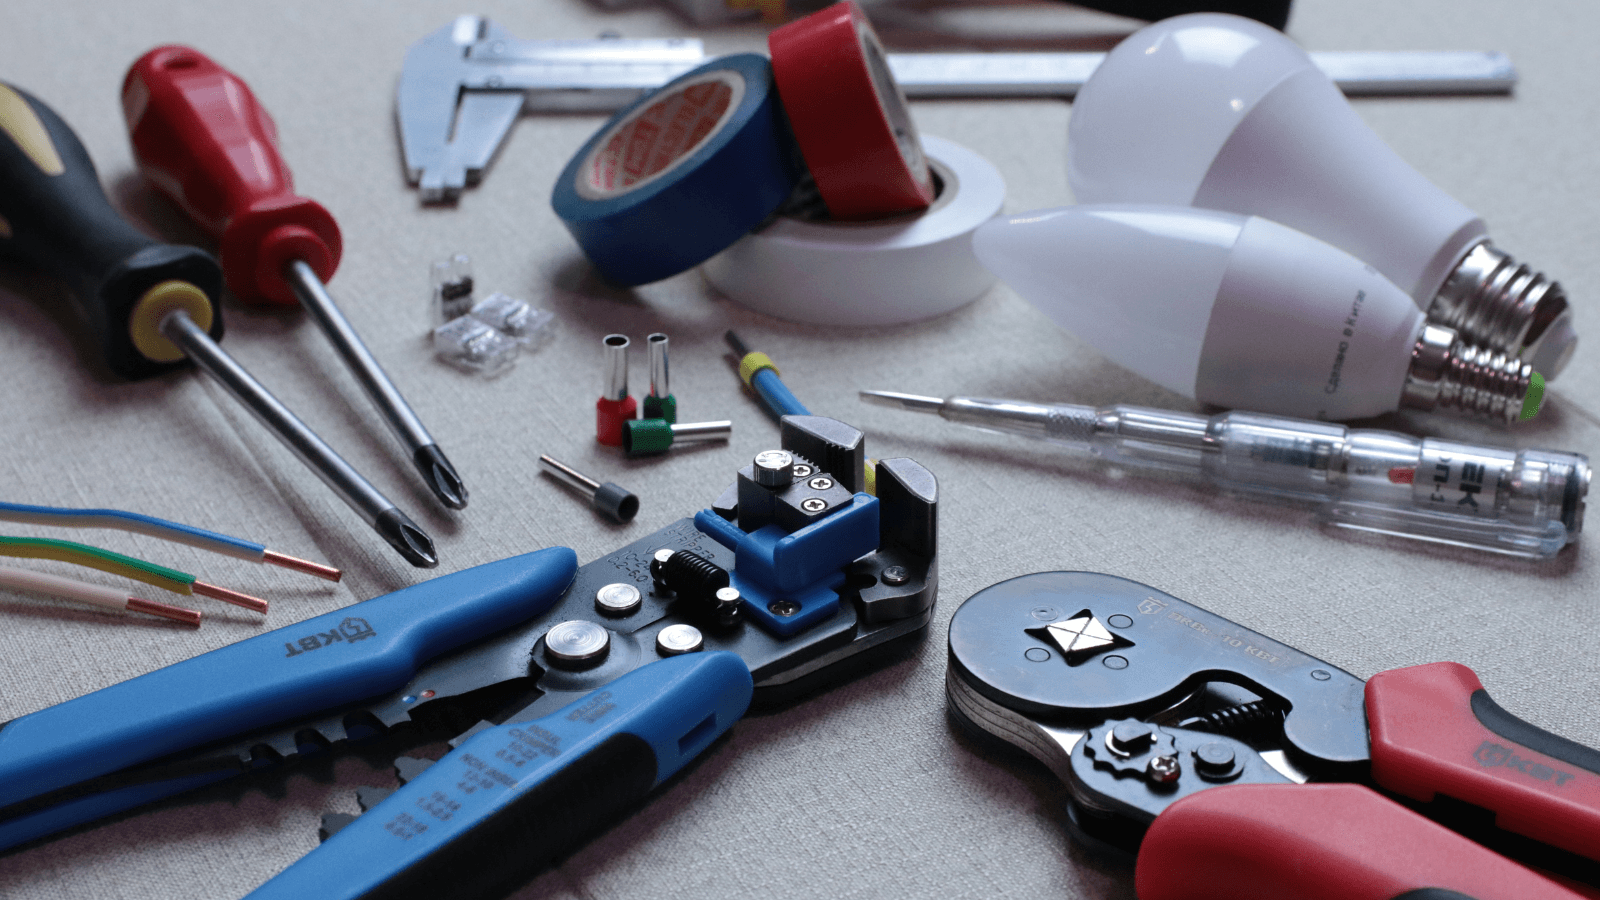 Repair Cafe Oshkosh comes to YMCA May 11th